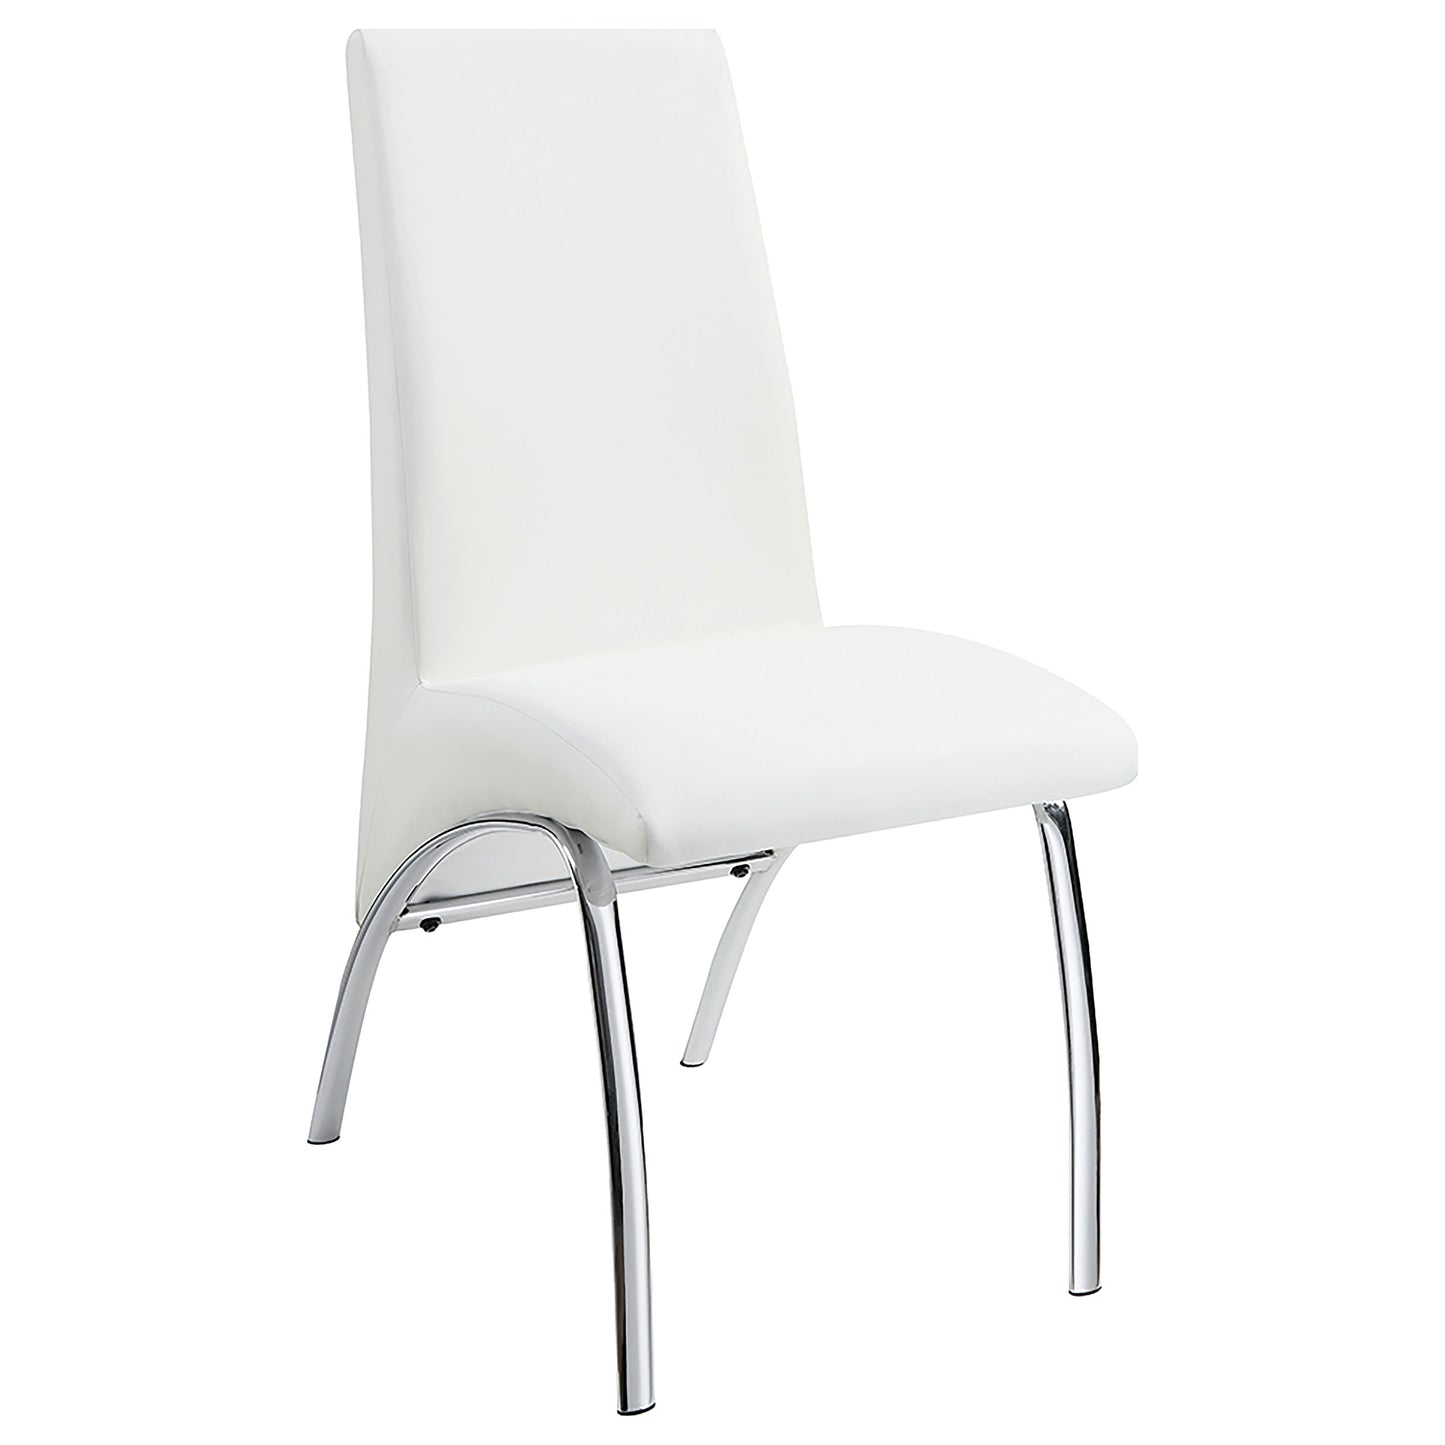 Bishop Upholstered Side Chairs White and Chrome (Set of 2)